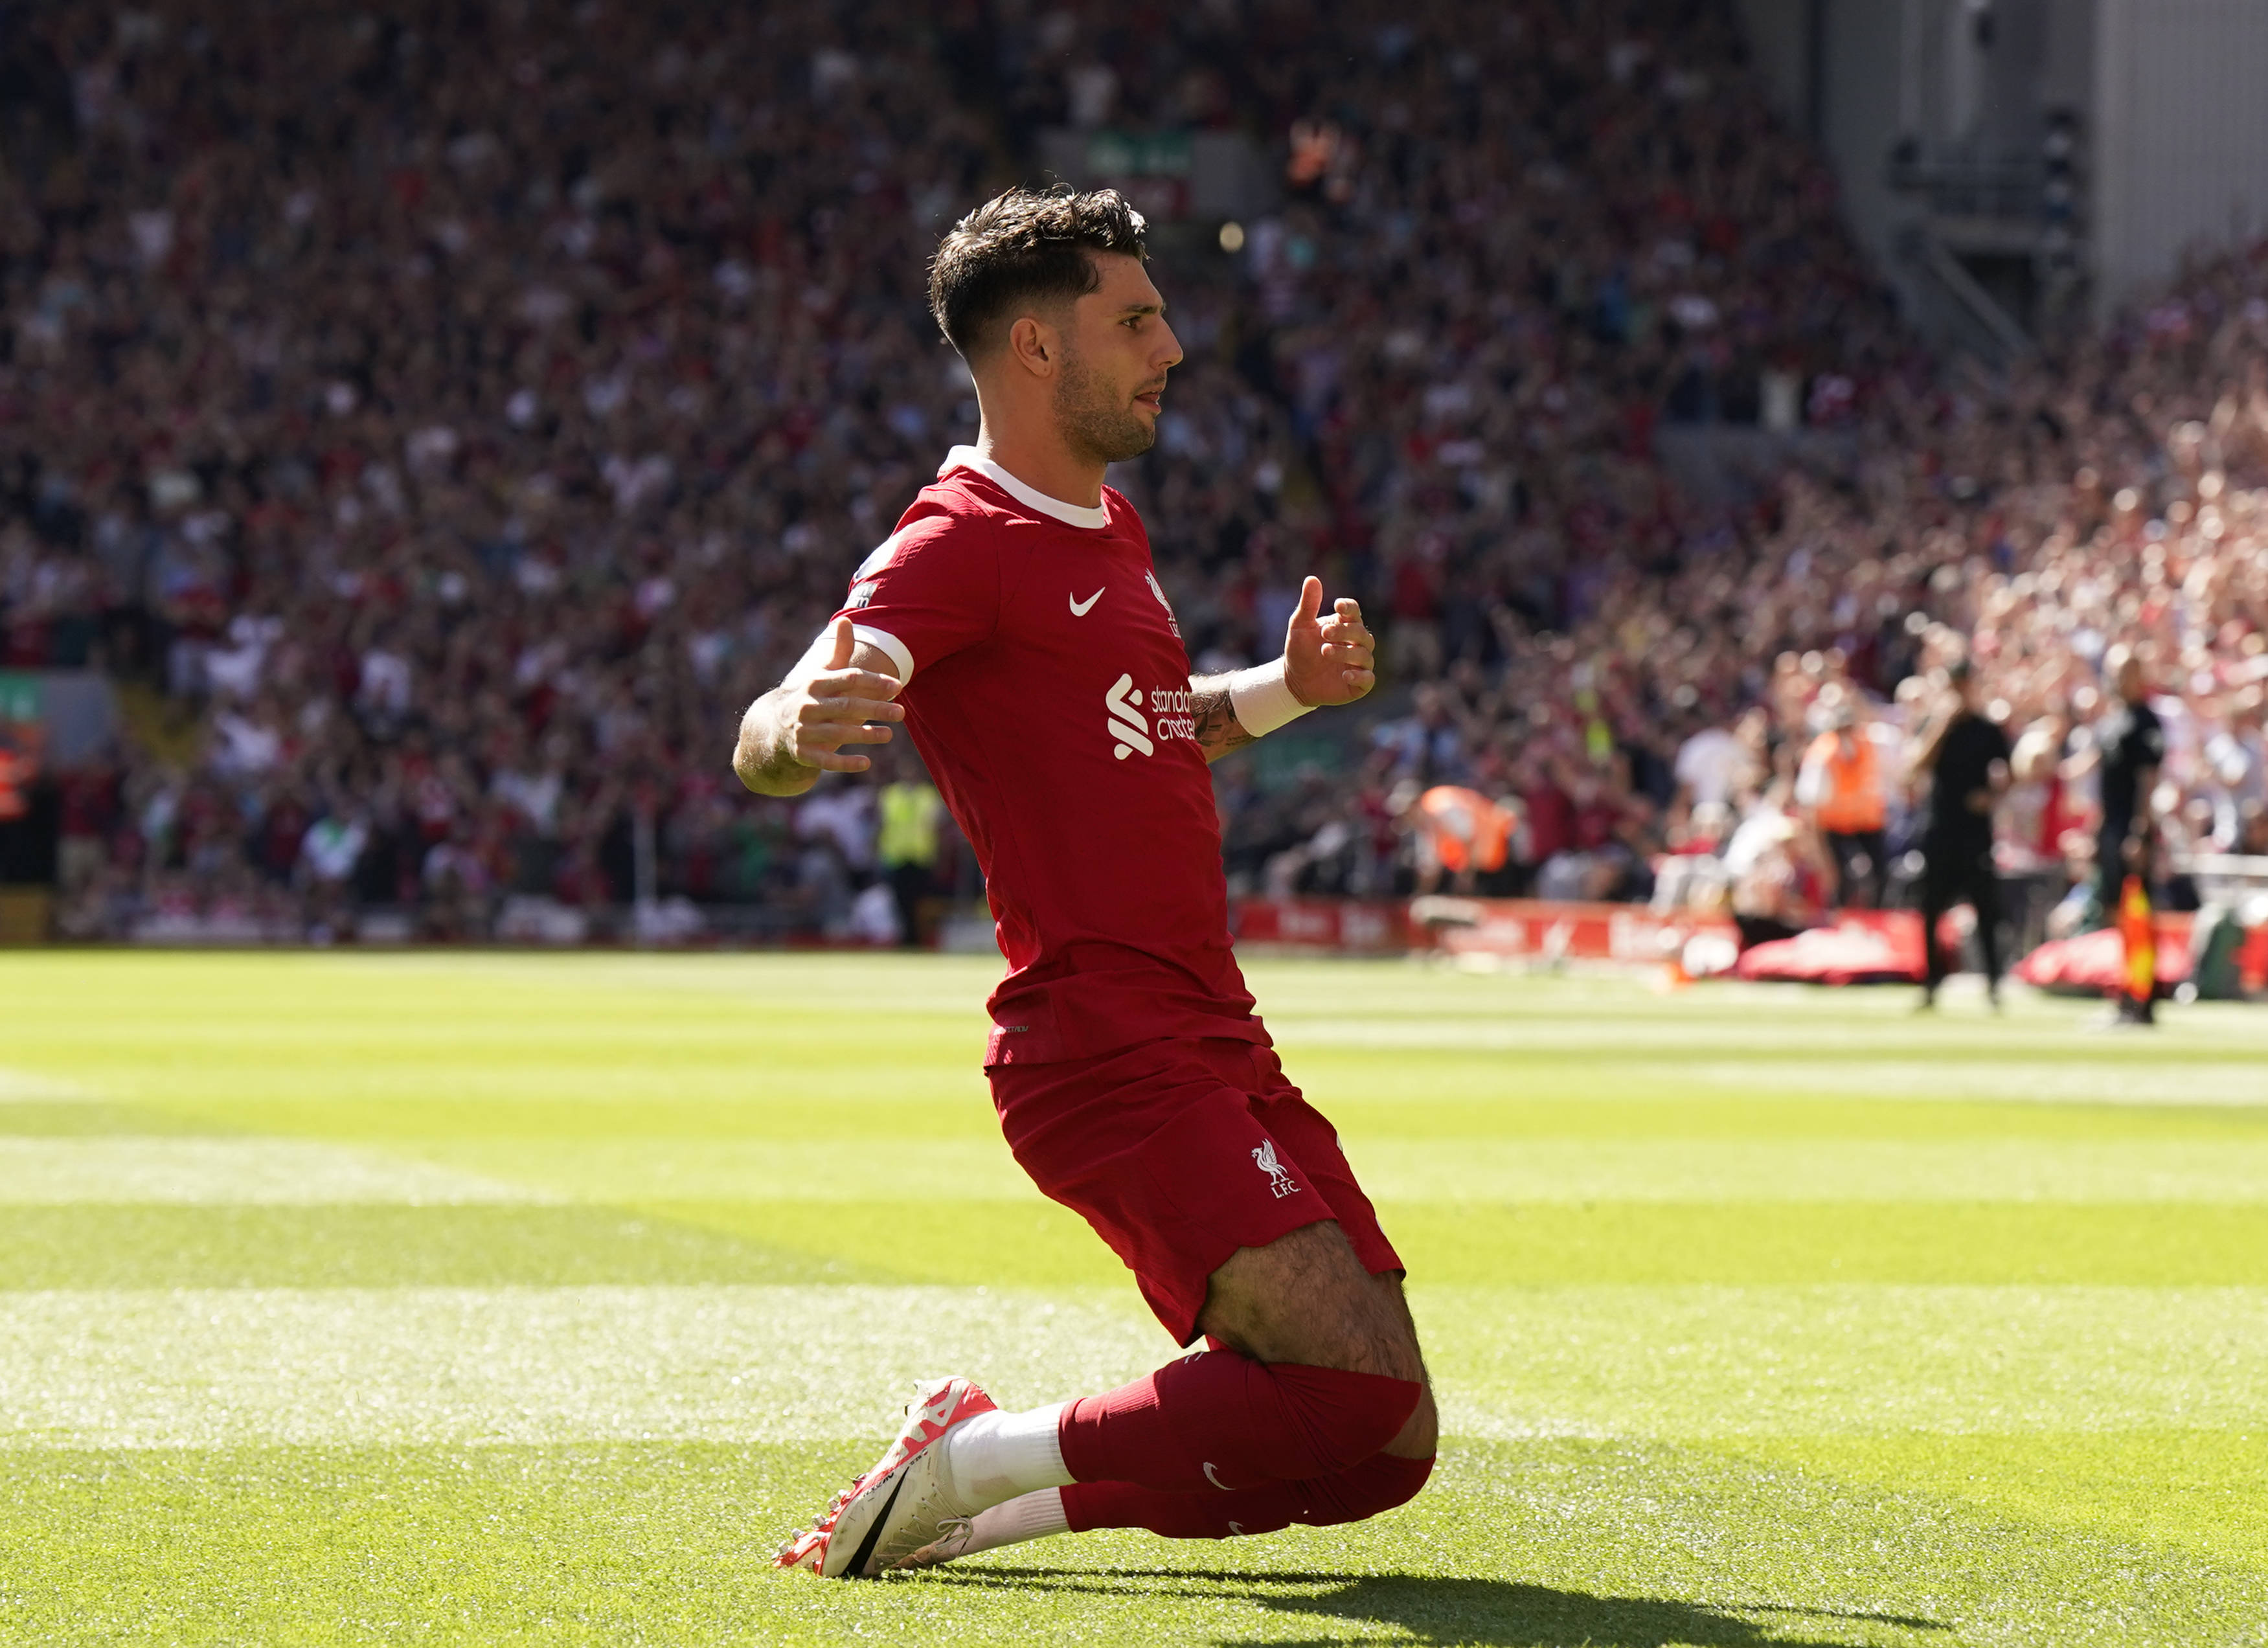 Dominik Szoboszlai pictured celebrating after scoring the first goal of his Liverpool career during an EPL game against Aston Villa at Anfield in September 2023